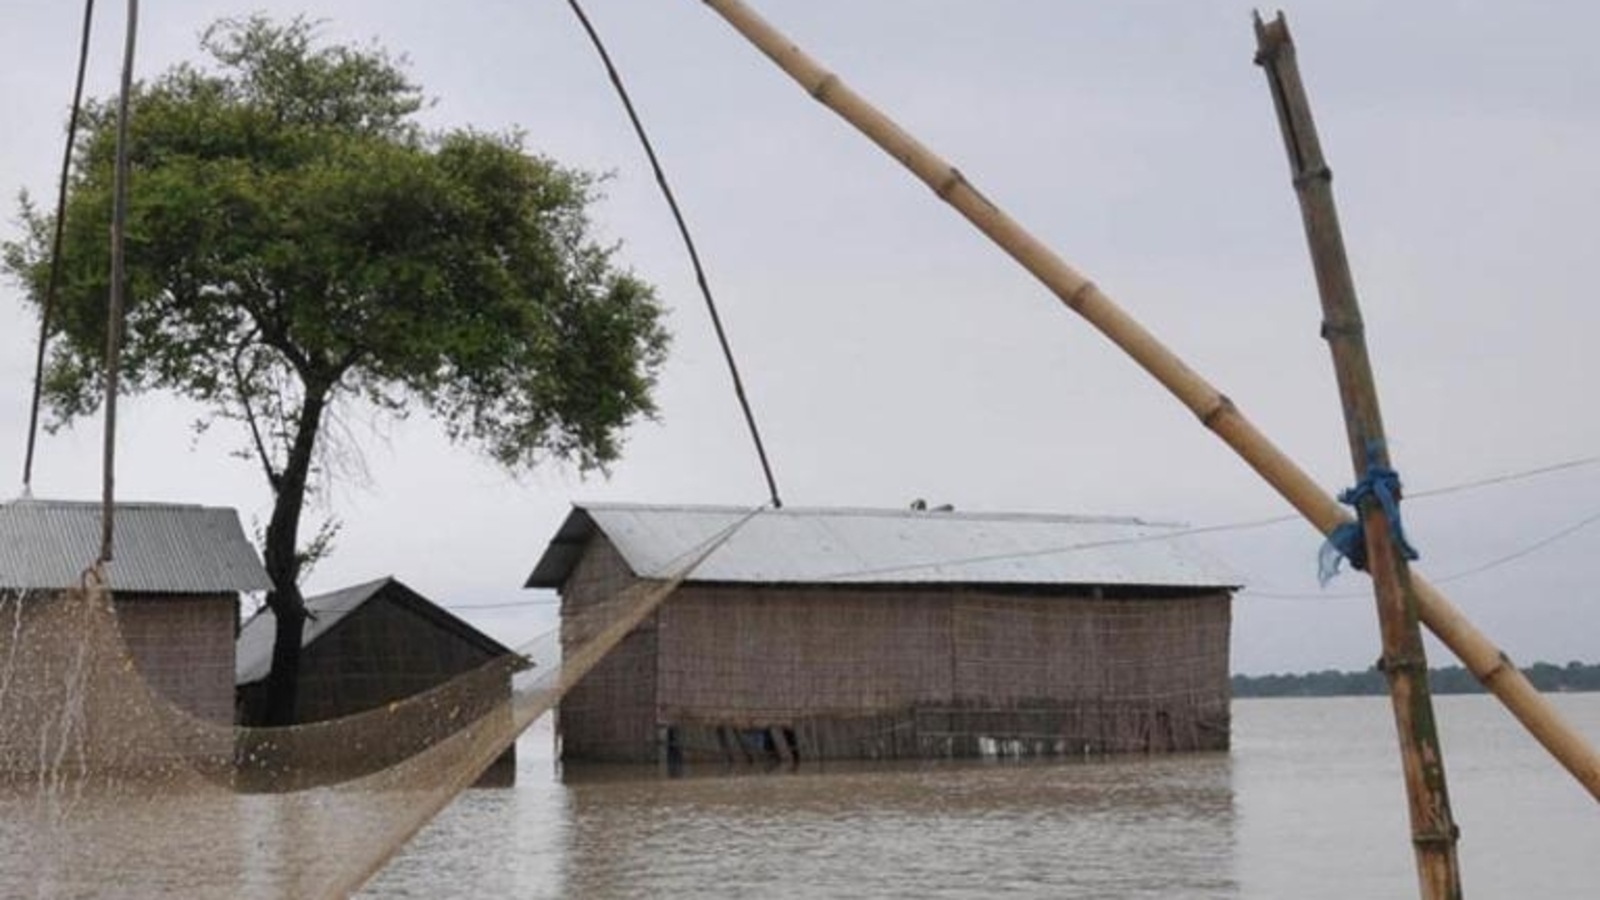 assam-grapples-with-third-wave-of-floods-this-season